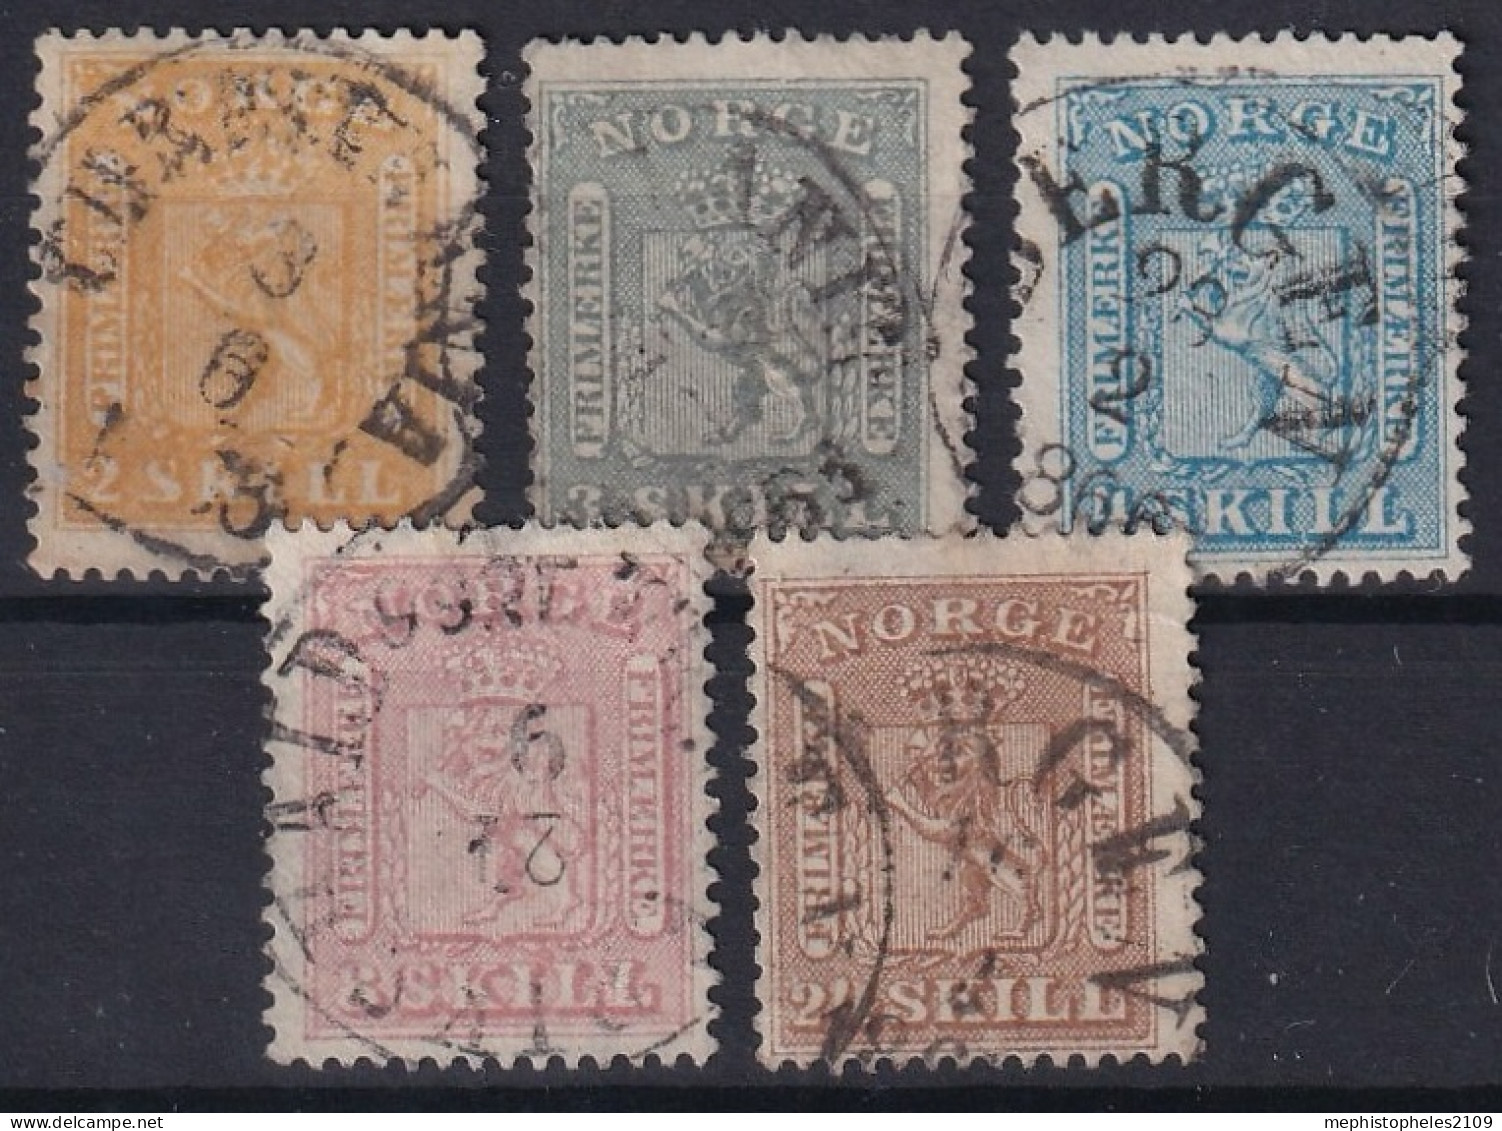 NORWAY 1863 - Canceled - Sc# 6-10 - Complete Set! - Used Stamps